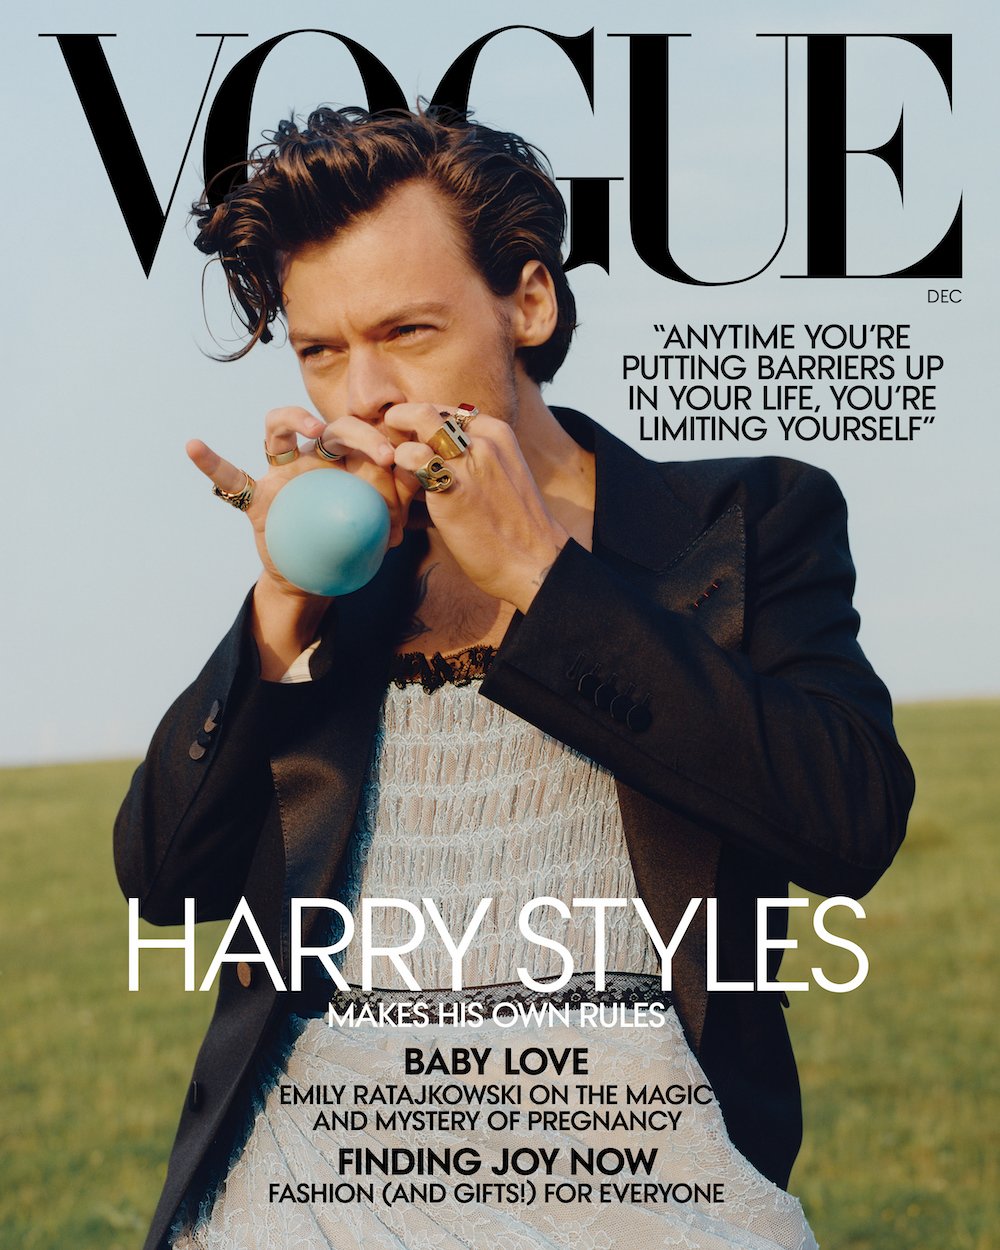 Harry Styles wore a dress on the cover of Vogue – and US right wingers lost it